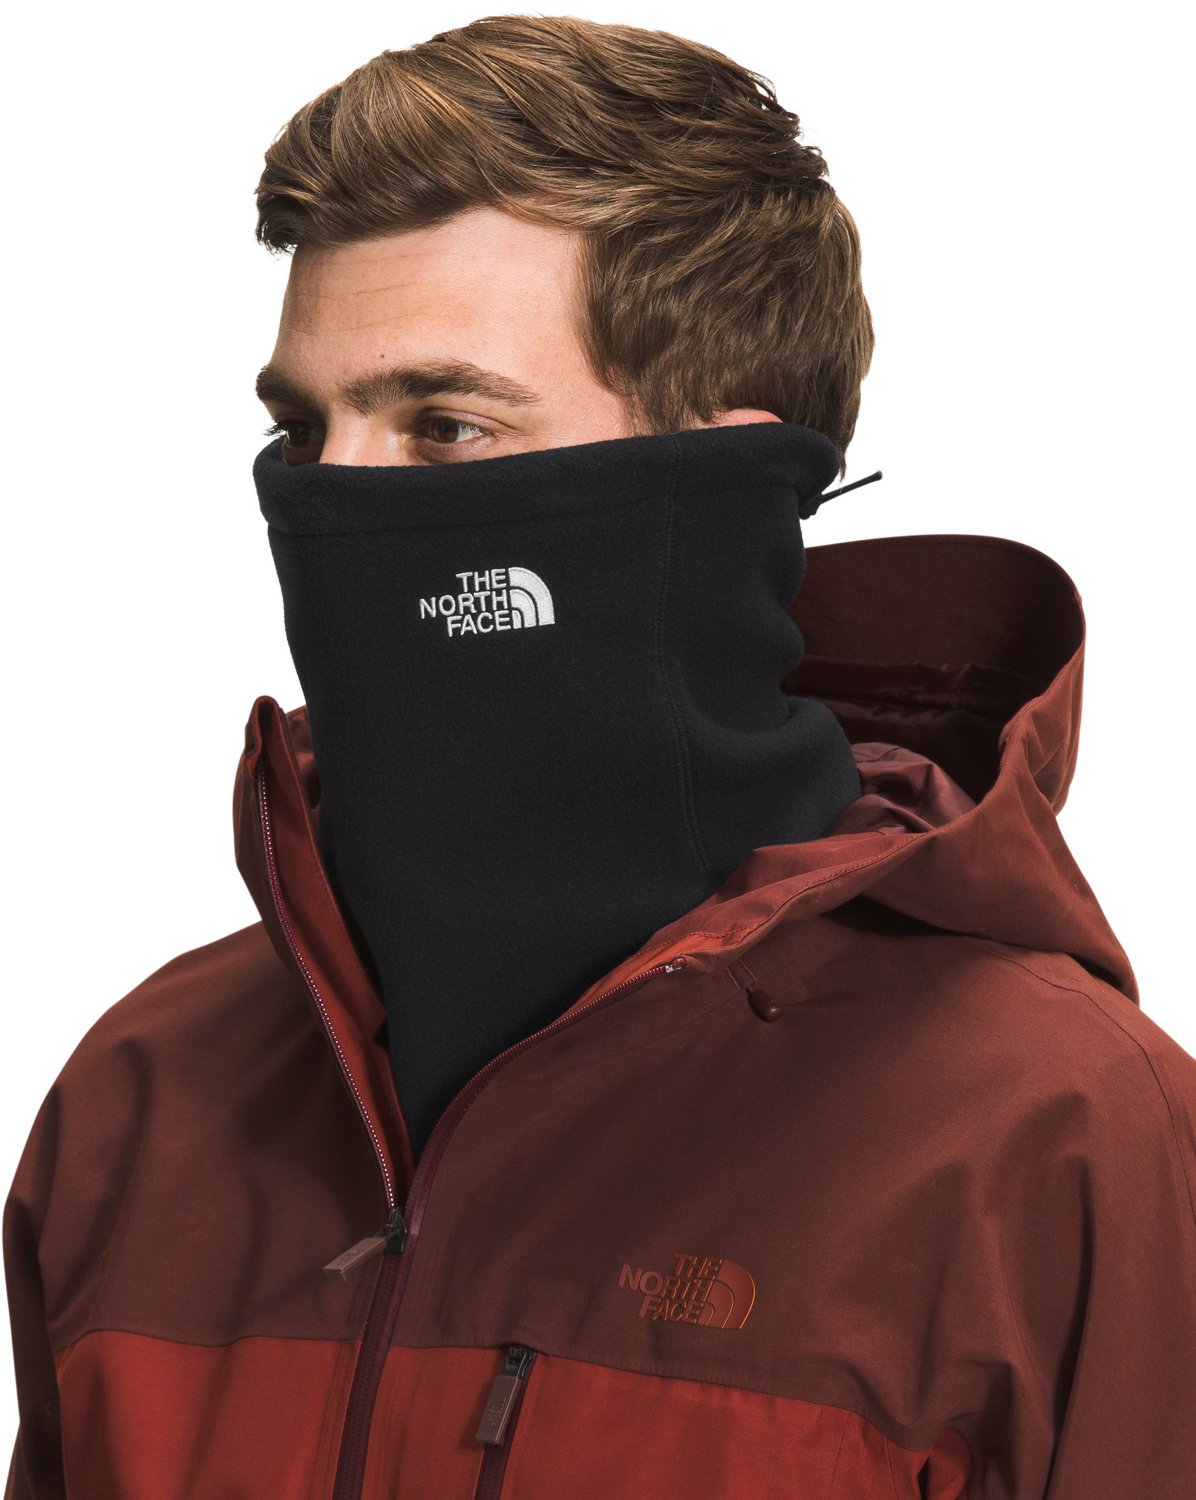 The North Face Adults' Neck Gaiter | Academy